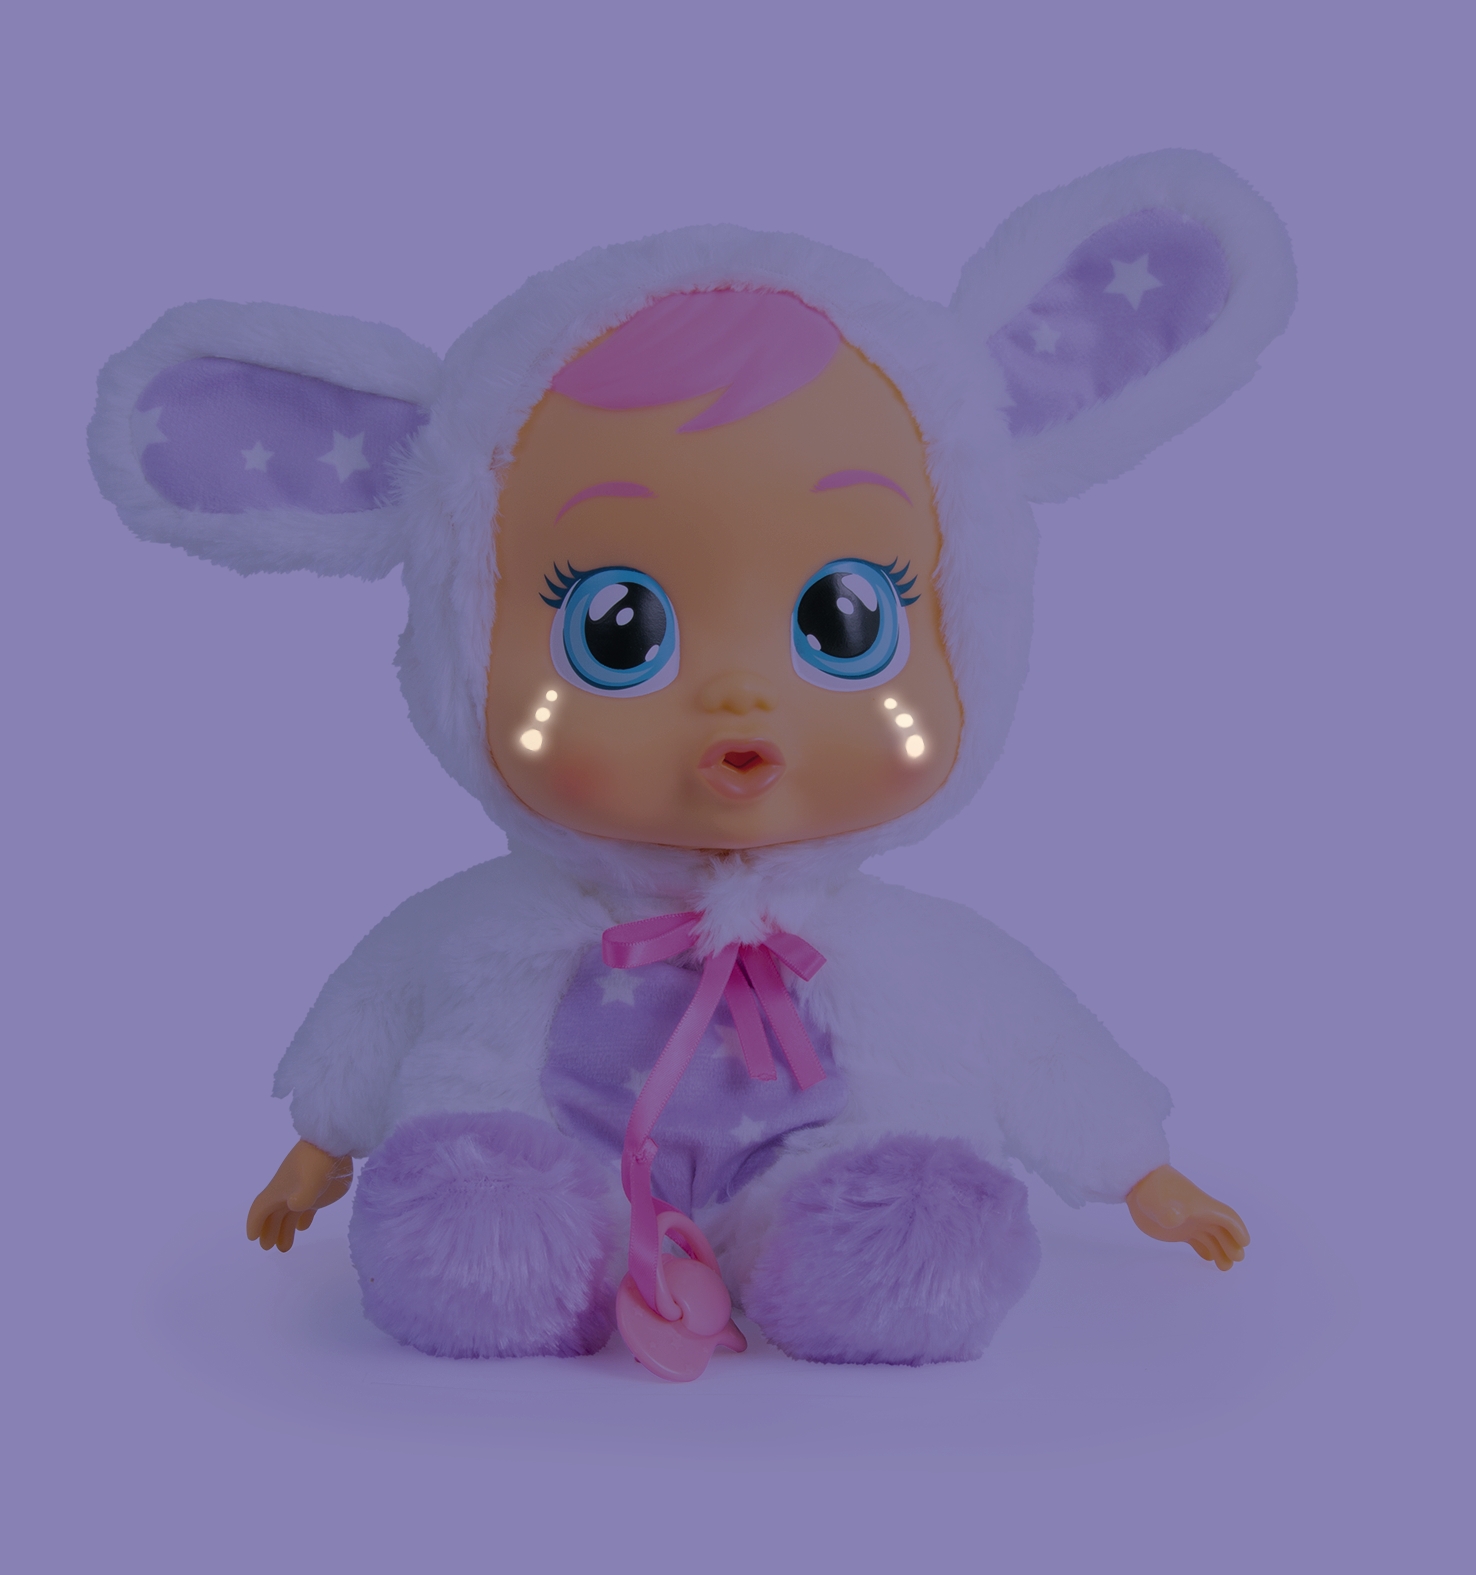 Cry Babies Goodnight Coney Doll - image 1 of 2